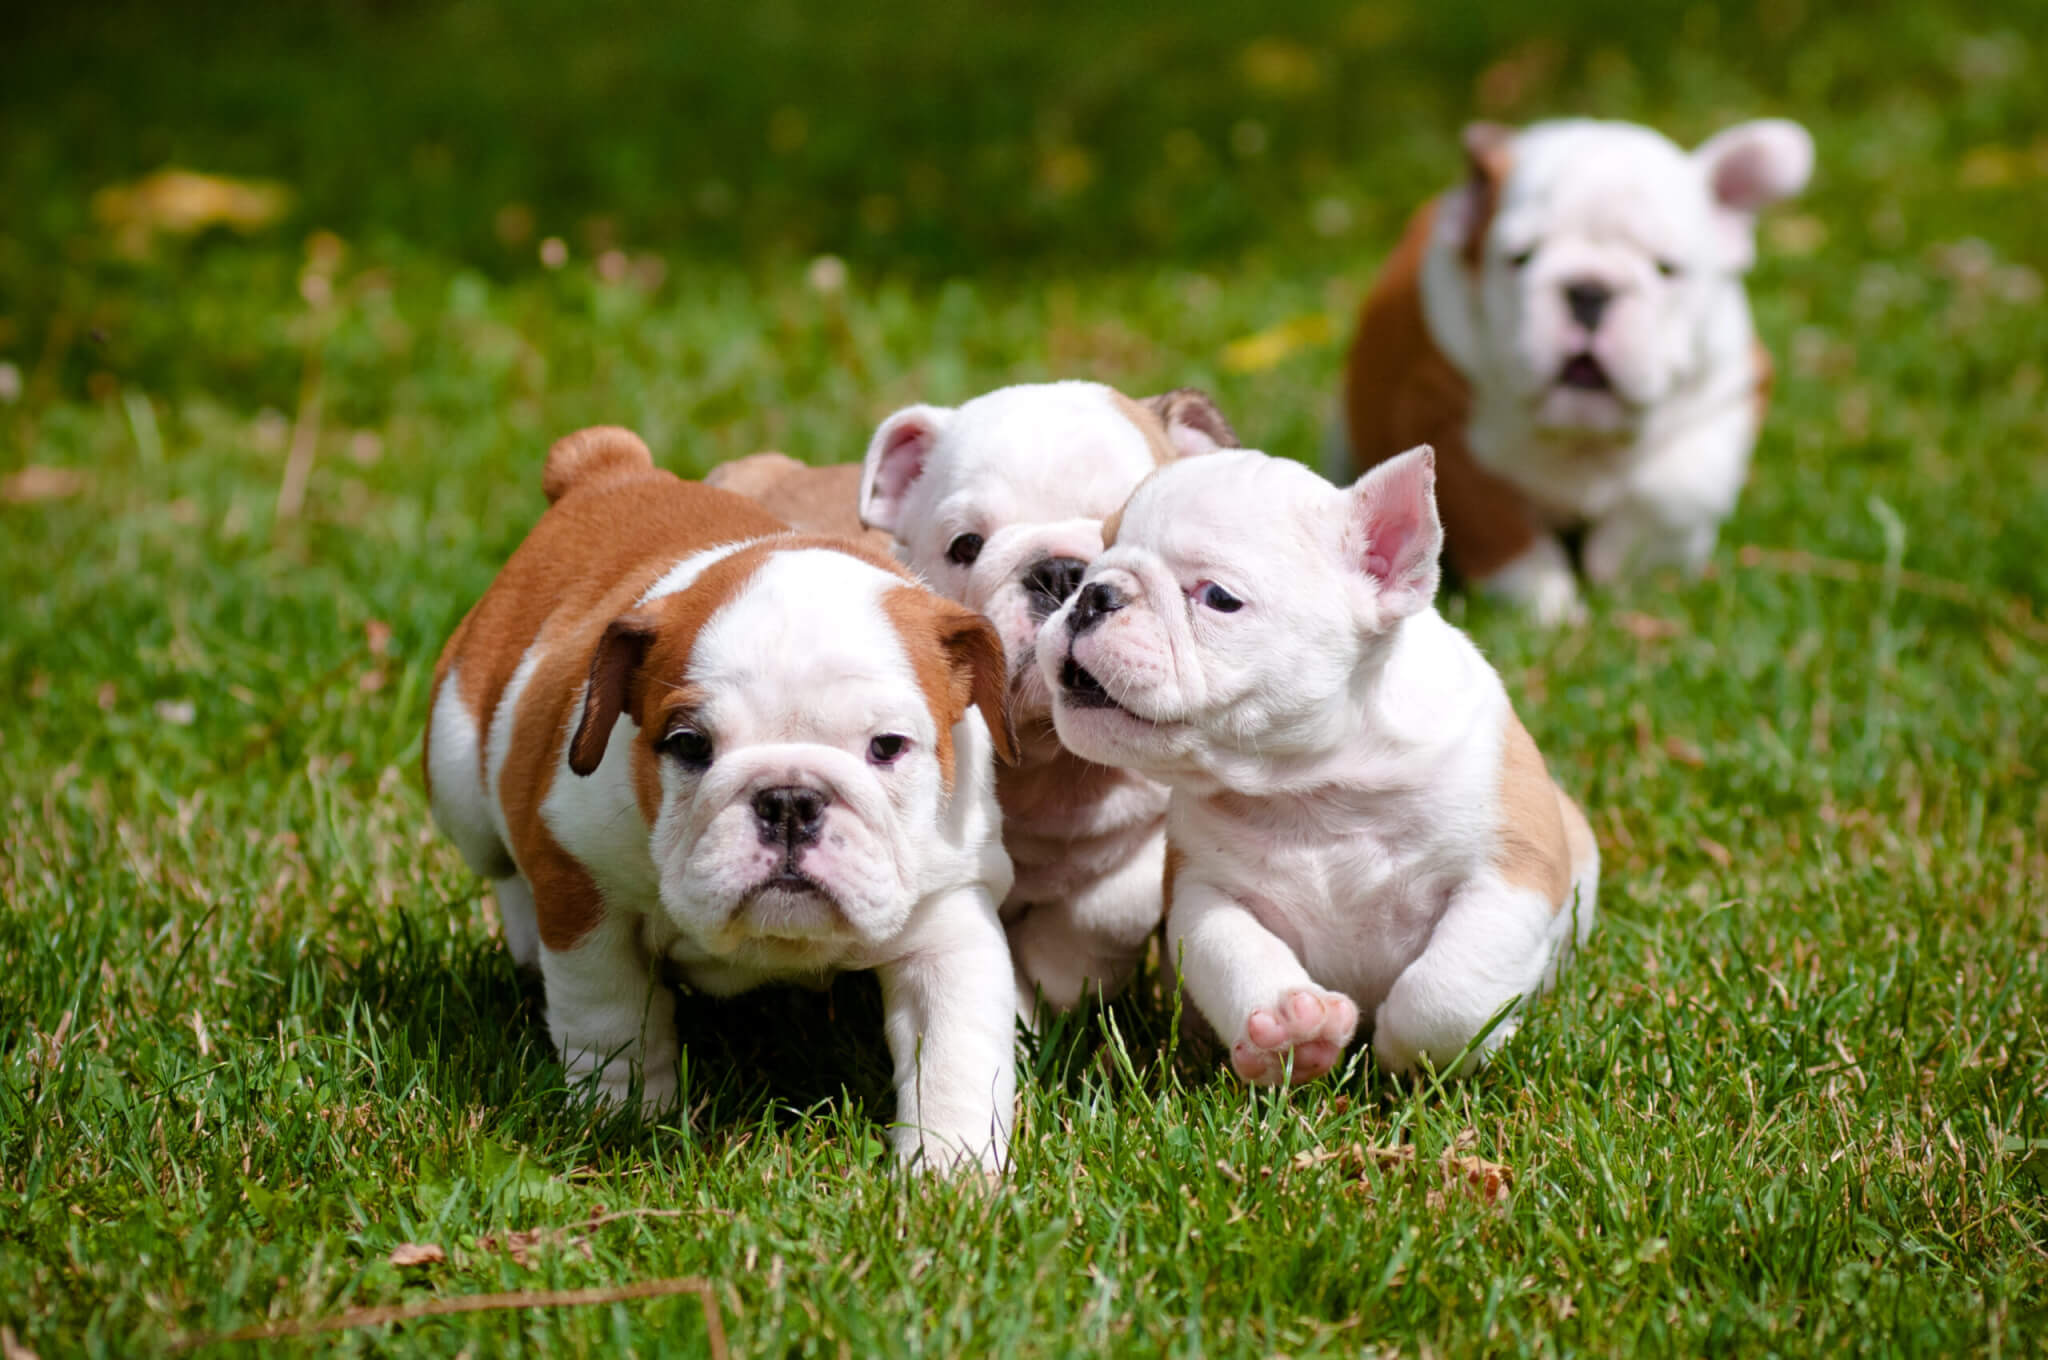 National Bulldogs Are Beautiful Day (April 21st)